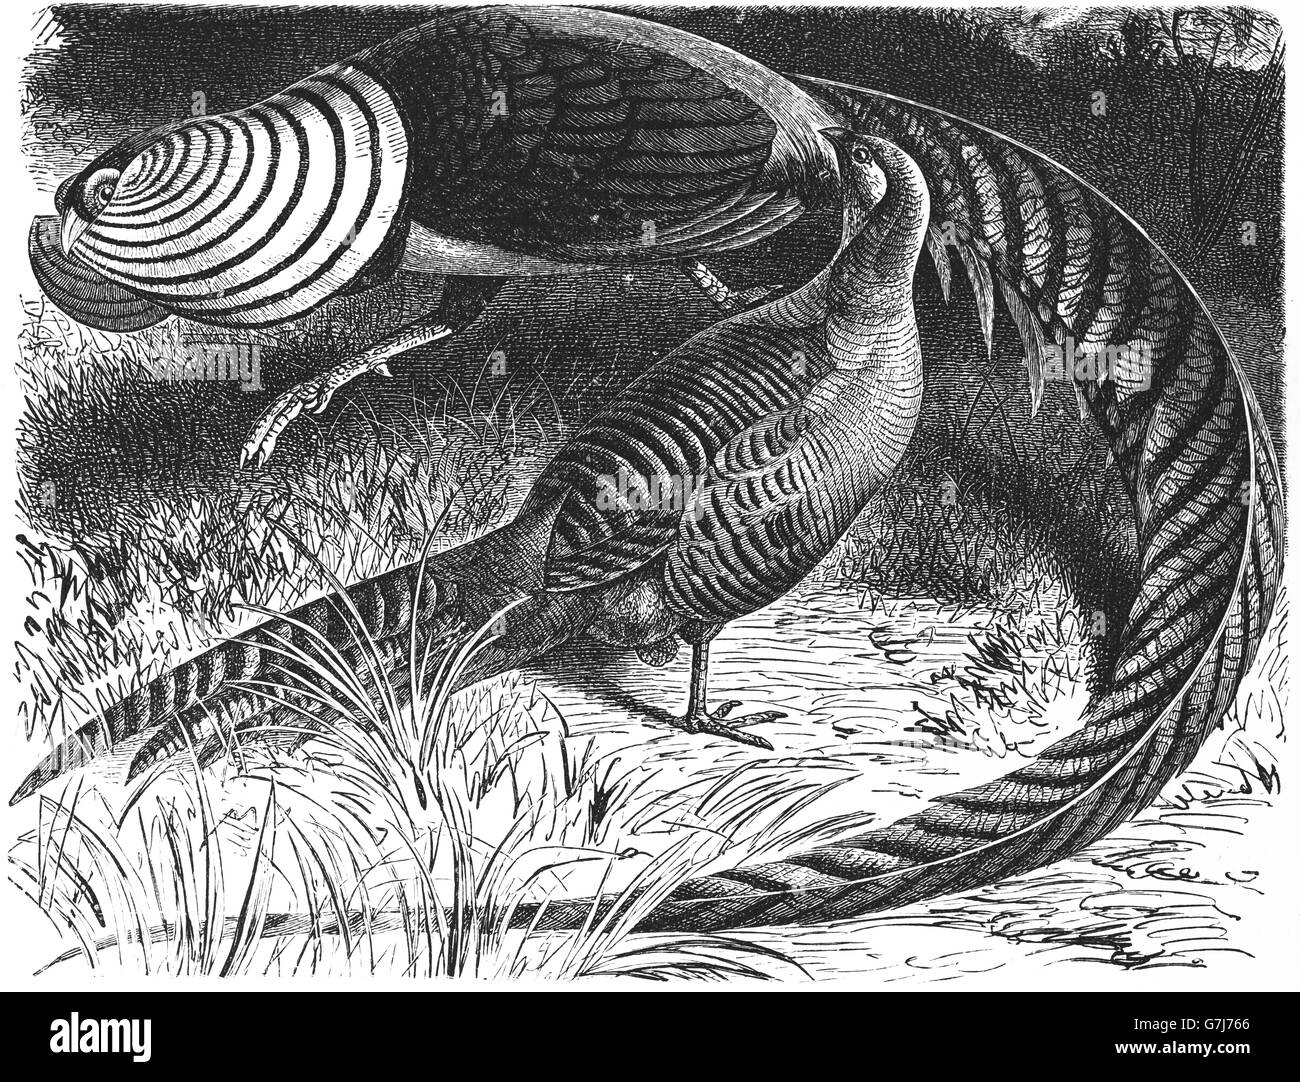 Lady Amherst's pheasant, Chrysolophus amherstiae, illustration from book dated 1904 Stock Photo